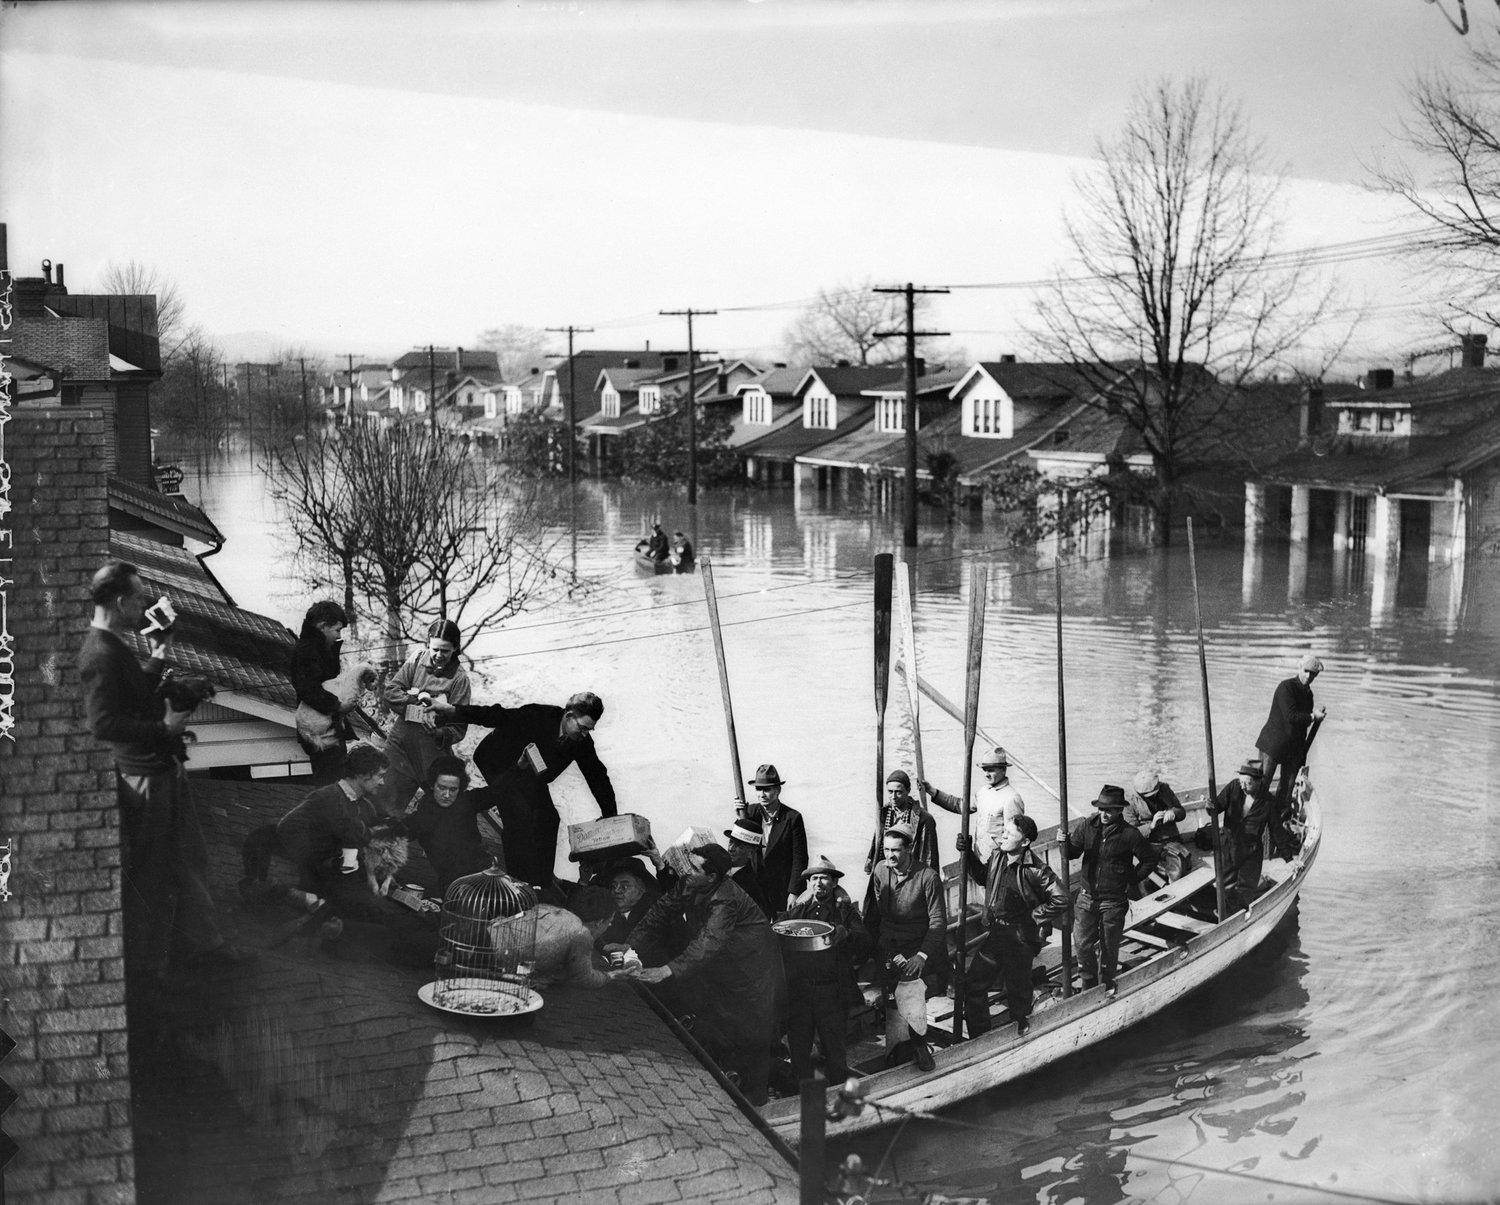 Louisville residents and their pets are rescued in this photo taken during the Great Flood of 1937. (UofL Photo Archives / Barry Bingham Jr. Courier-Journal Photo Collection)